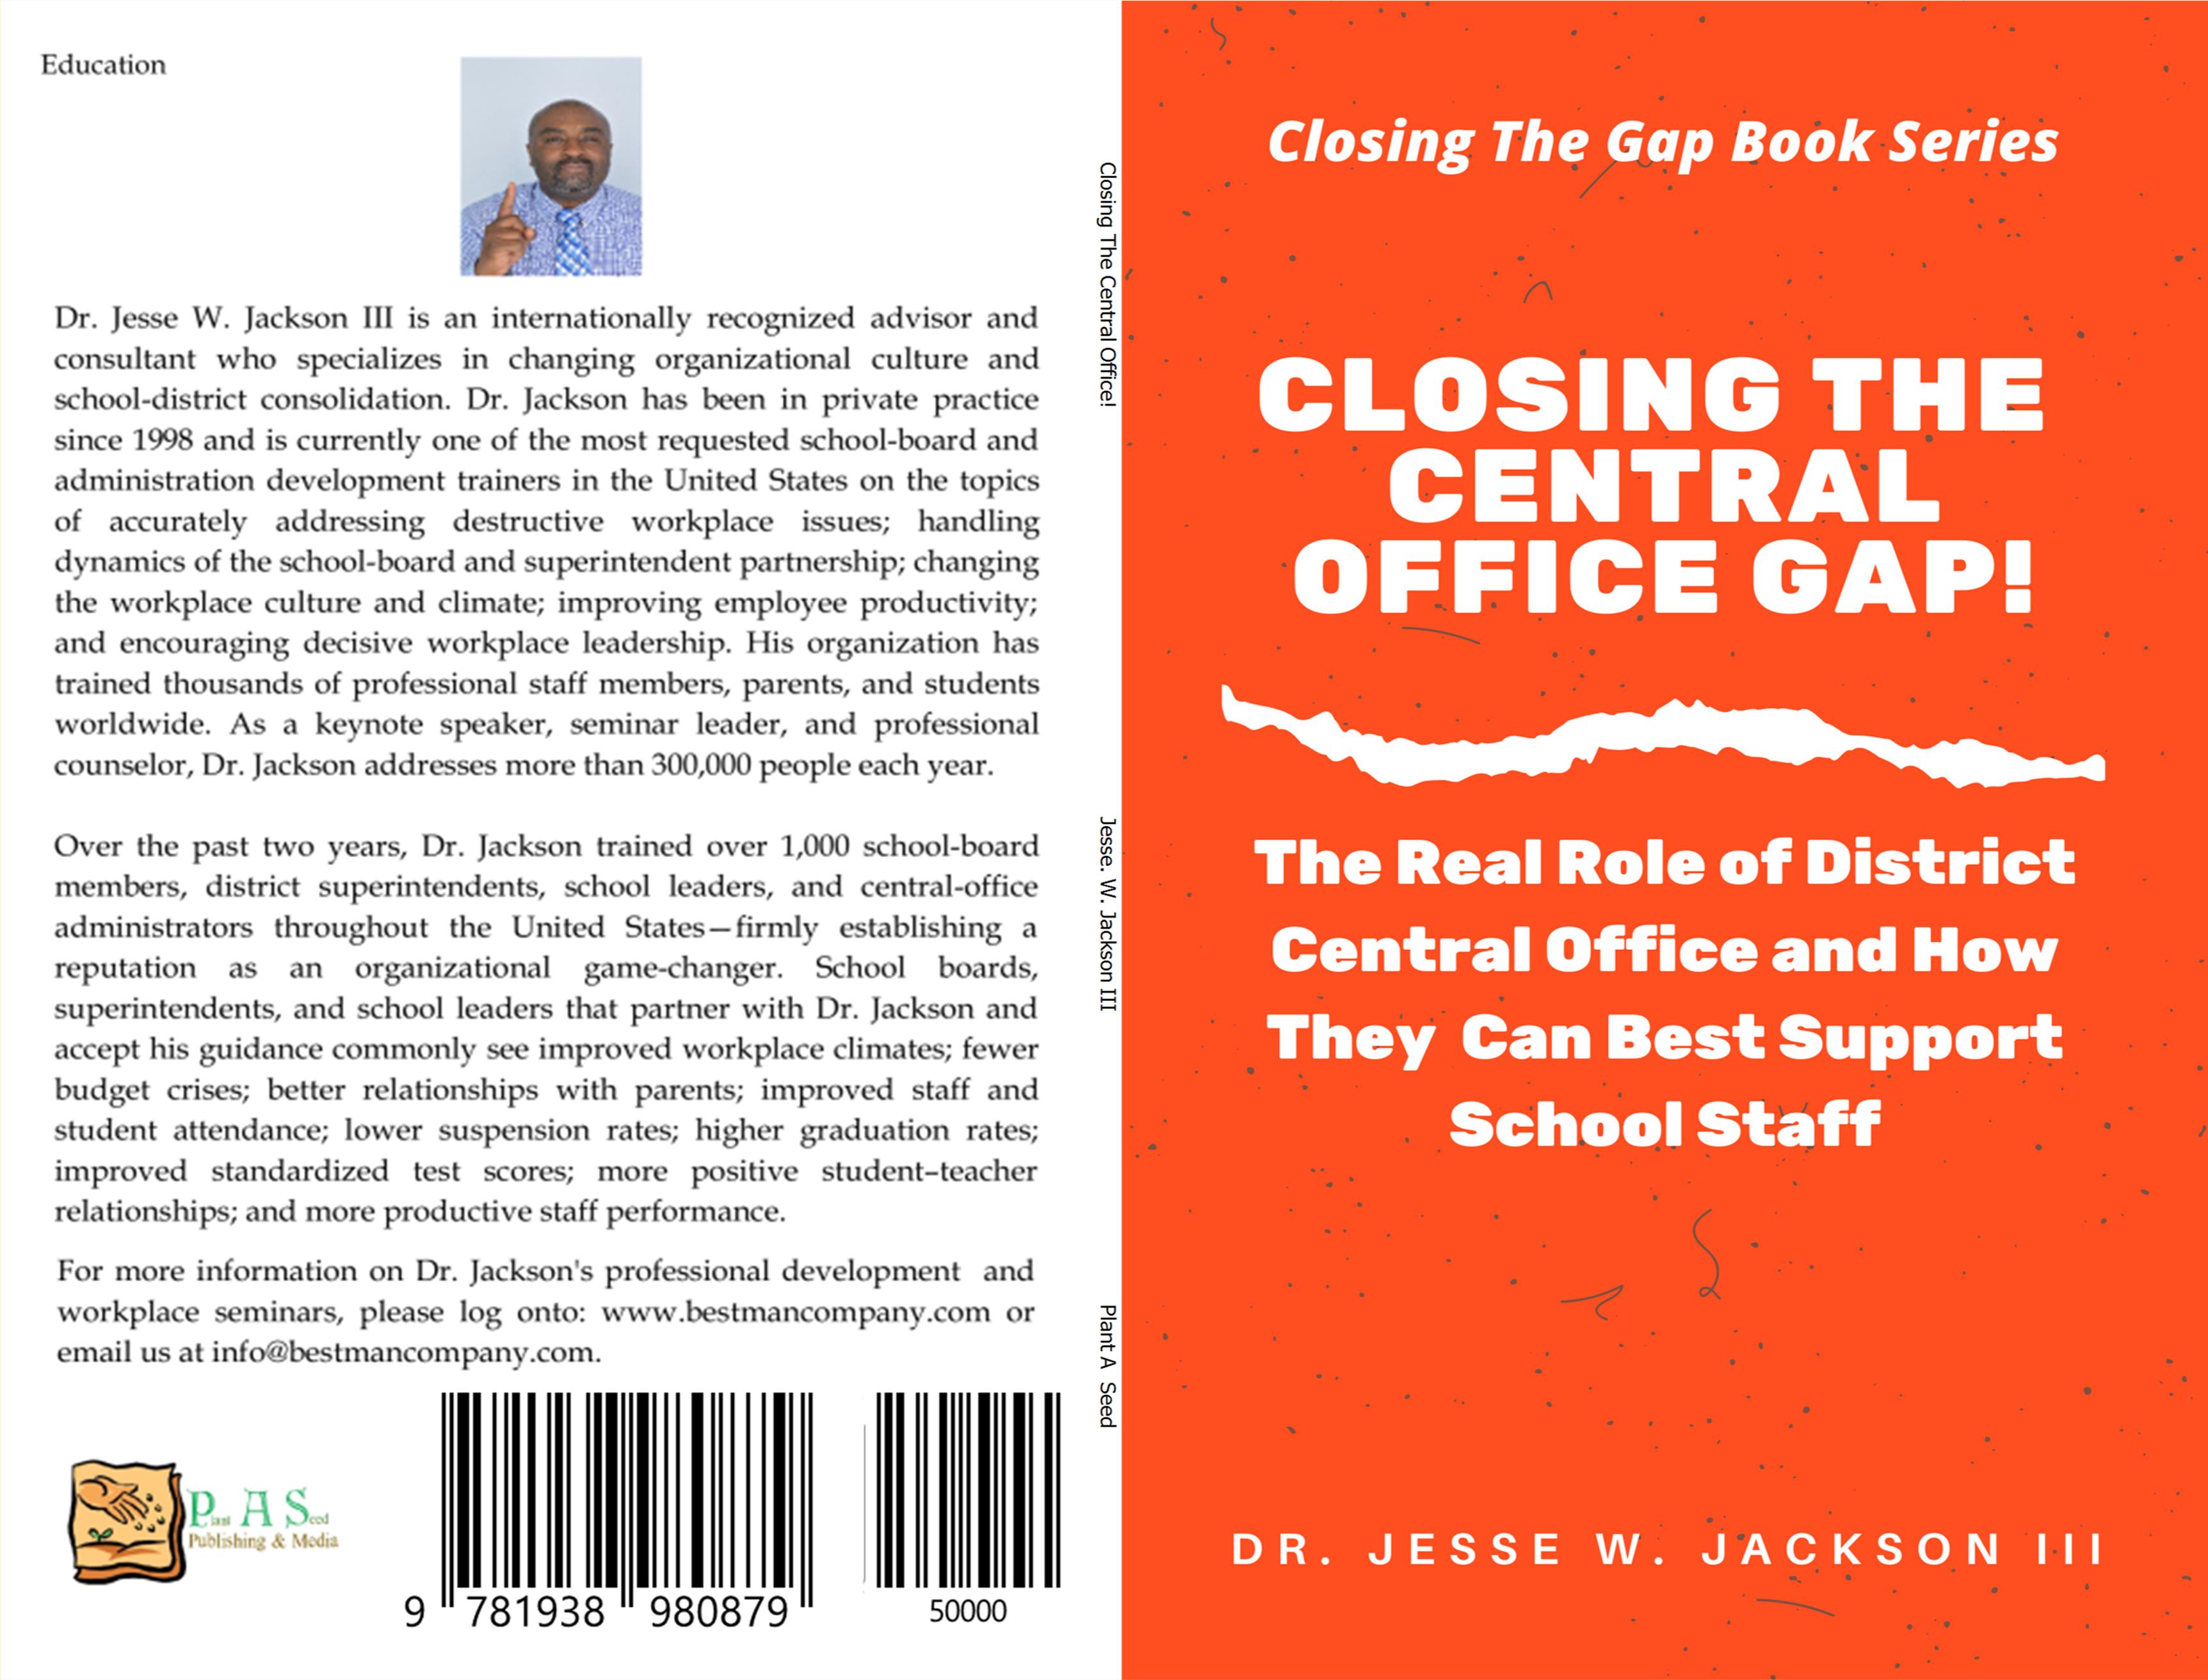 Closing the Central Office Gap!  The Real Role of District Central Office and How They Can Best Support School Staff cover image